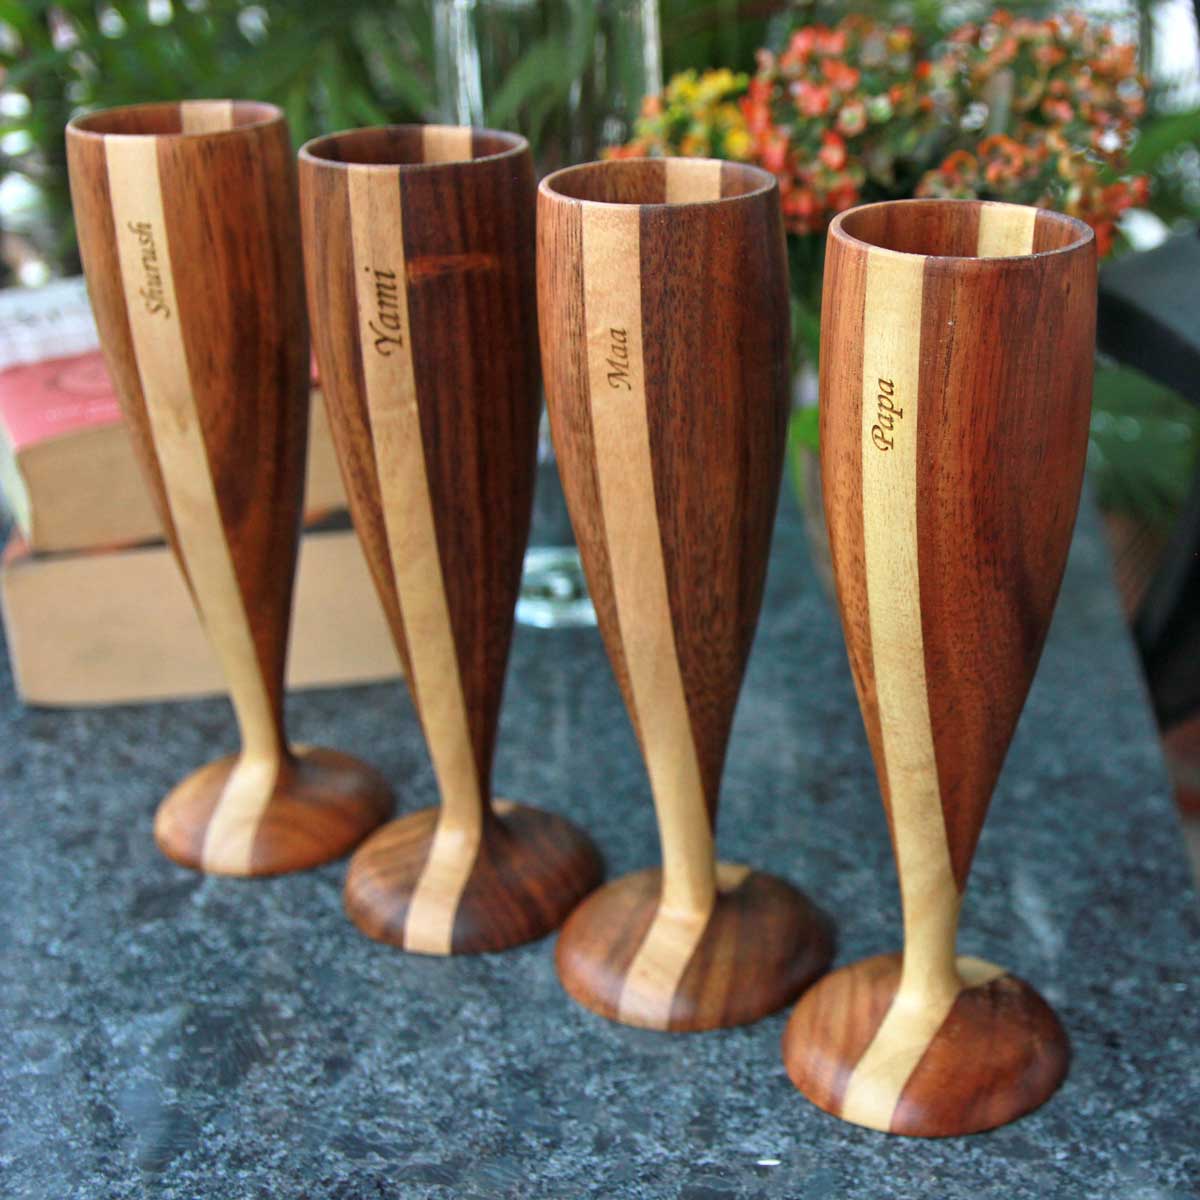 https://cdn.shopify.com/s/files/1/0941/2500/products/personalized-wood-champagne-glasses-gift-for-family-woodgeekstore-square_1600x.jpg?v=1650353936